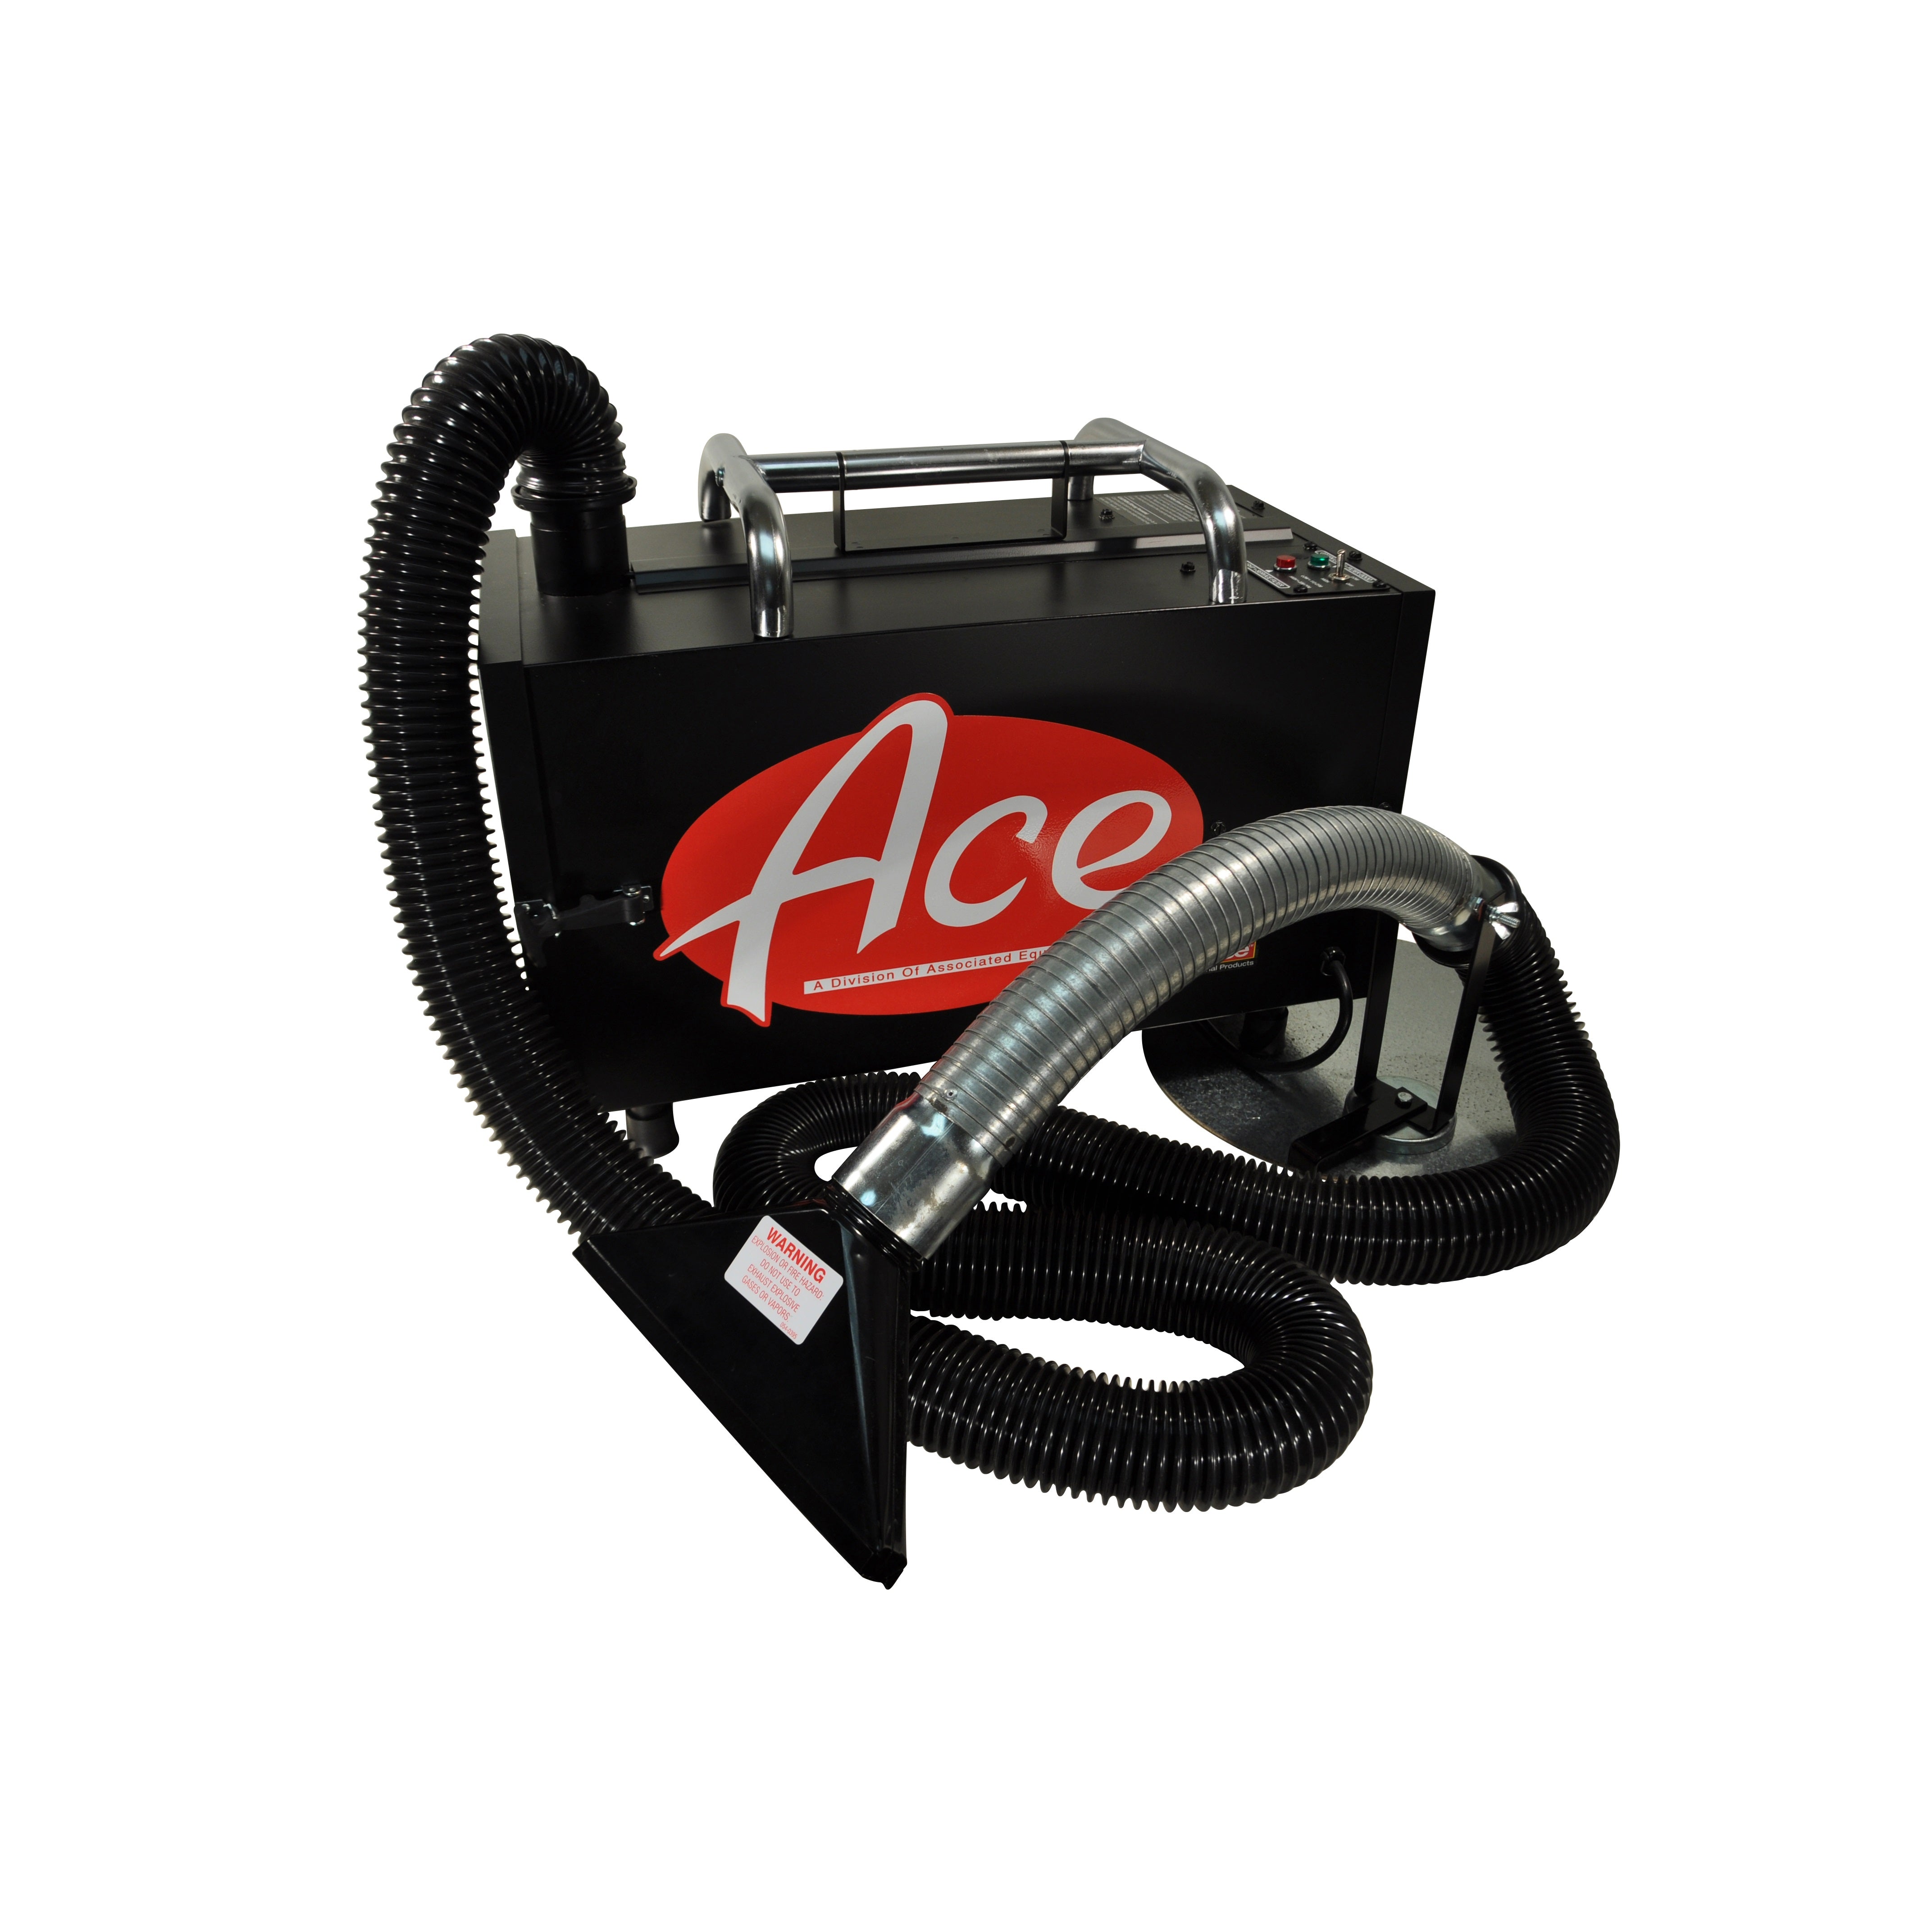 Ace 120V Portable Fume Extractor (73-201-HEPA)